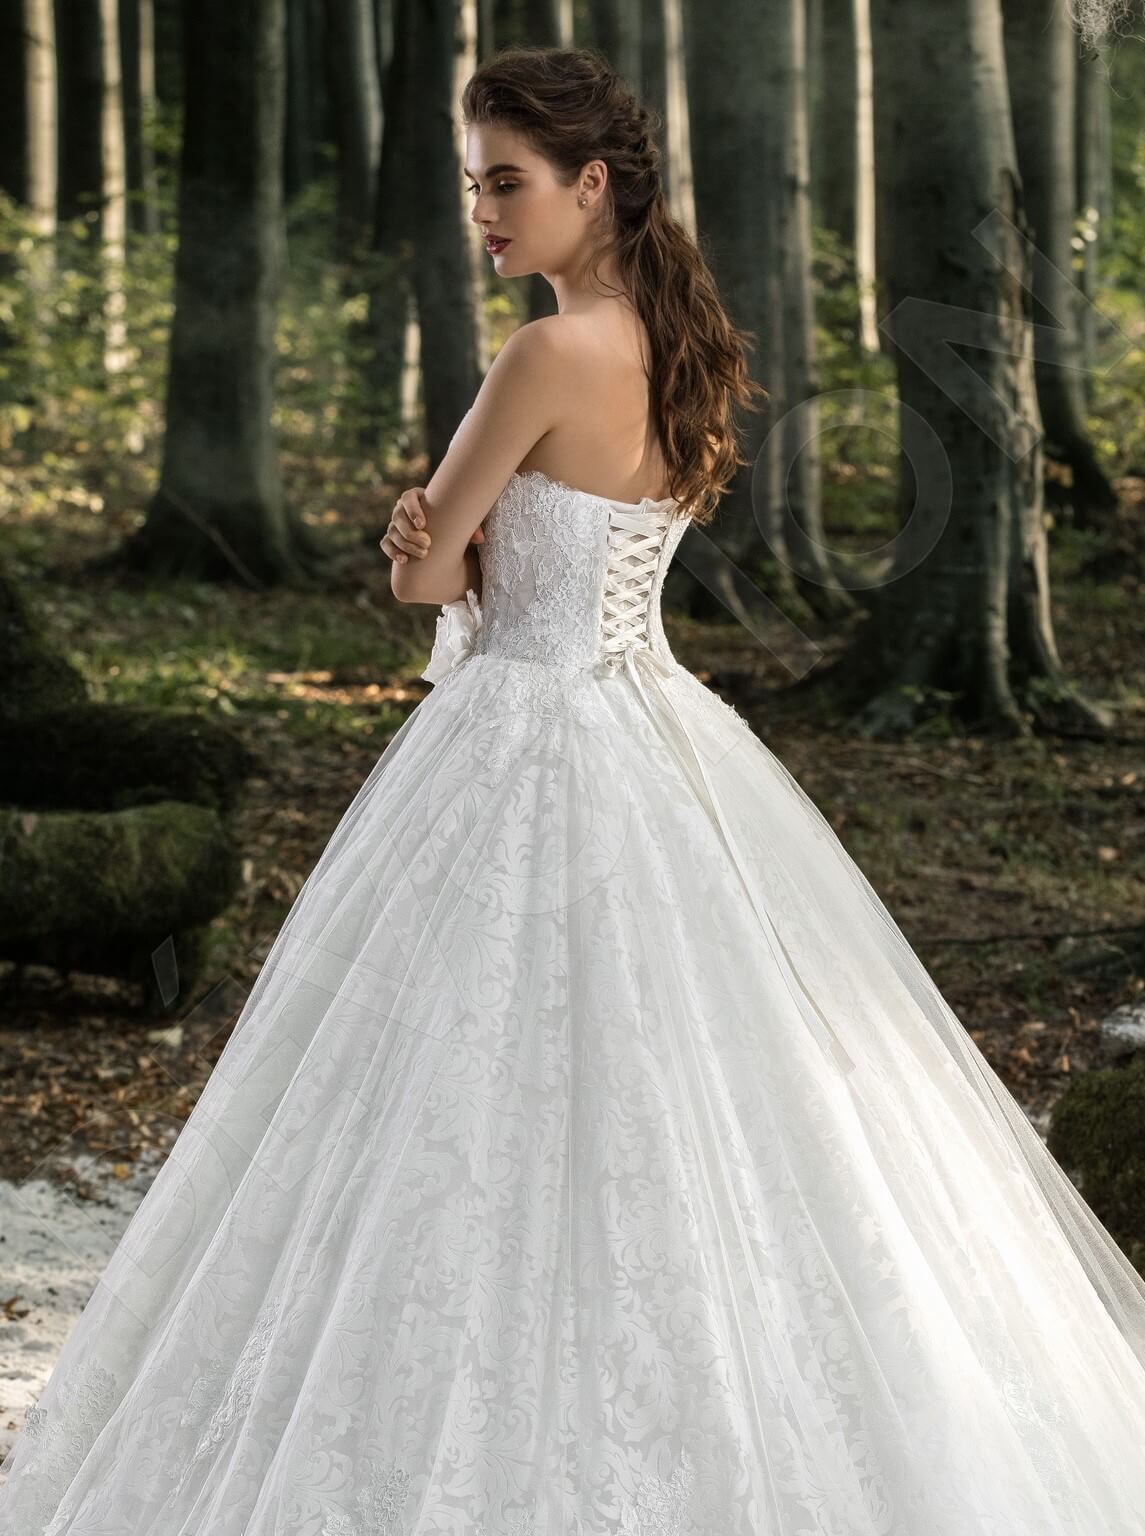 Noely Princess/Ball Gown Sweetheart White Wedding dress